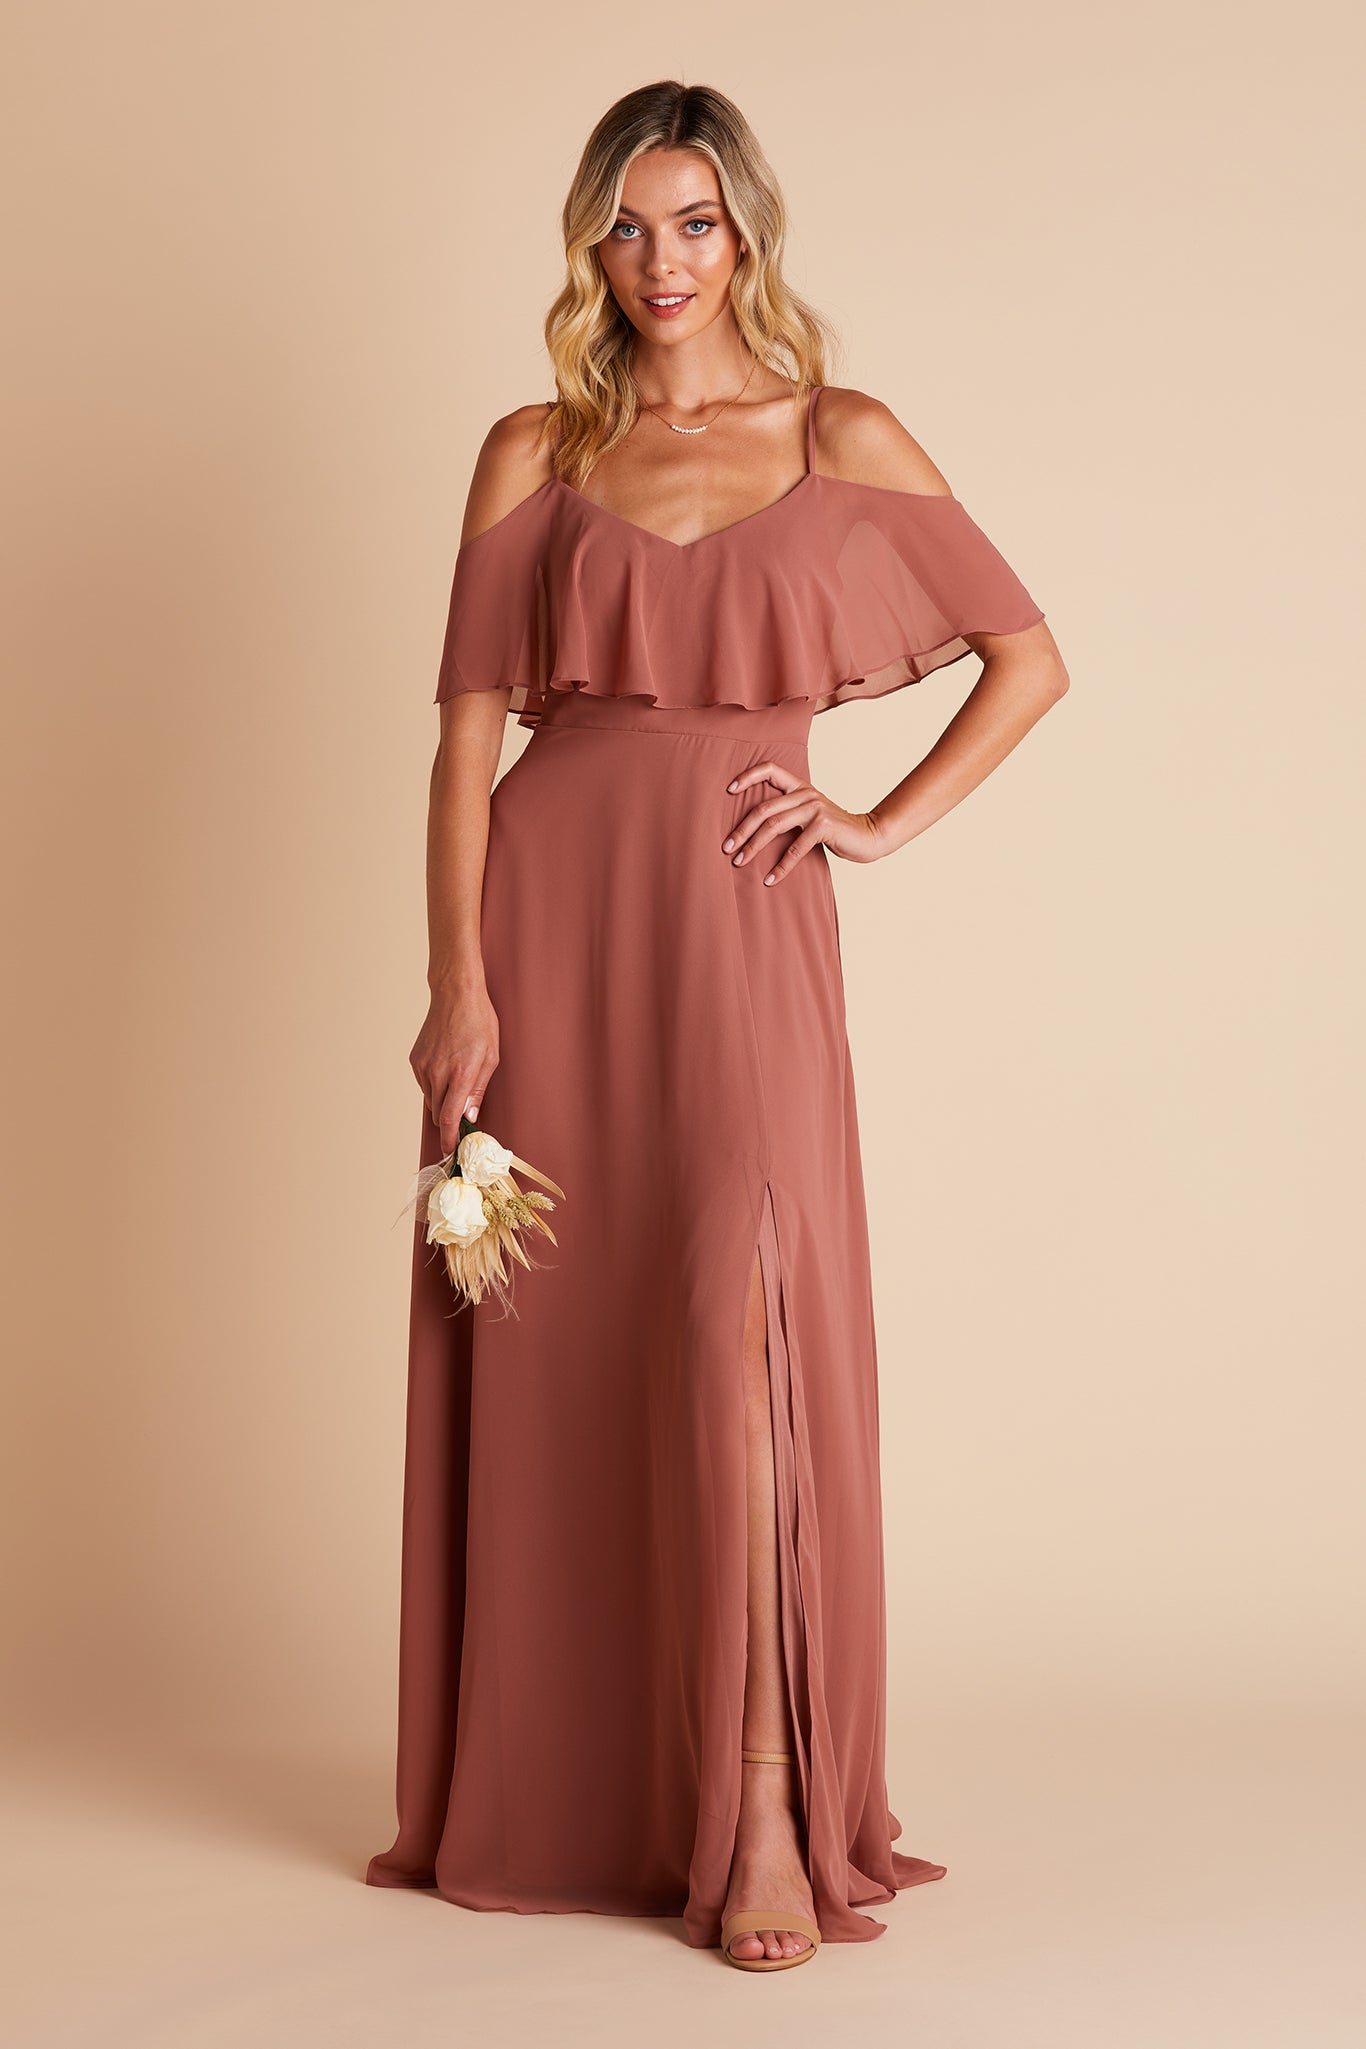 Jane convertible bridesmaid dress with slit in desert rose chiffon by Birdy Grey, front view